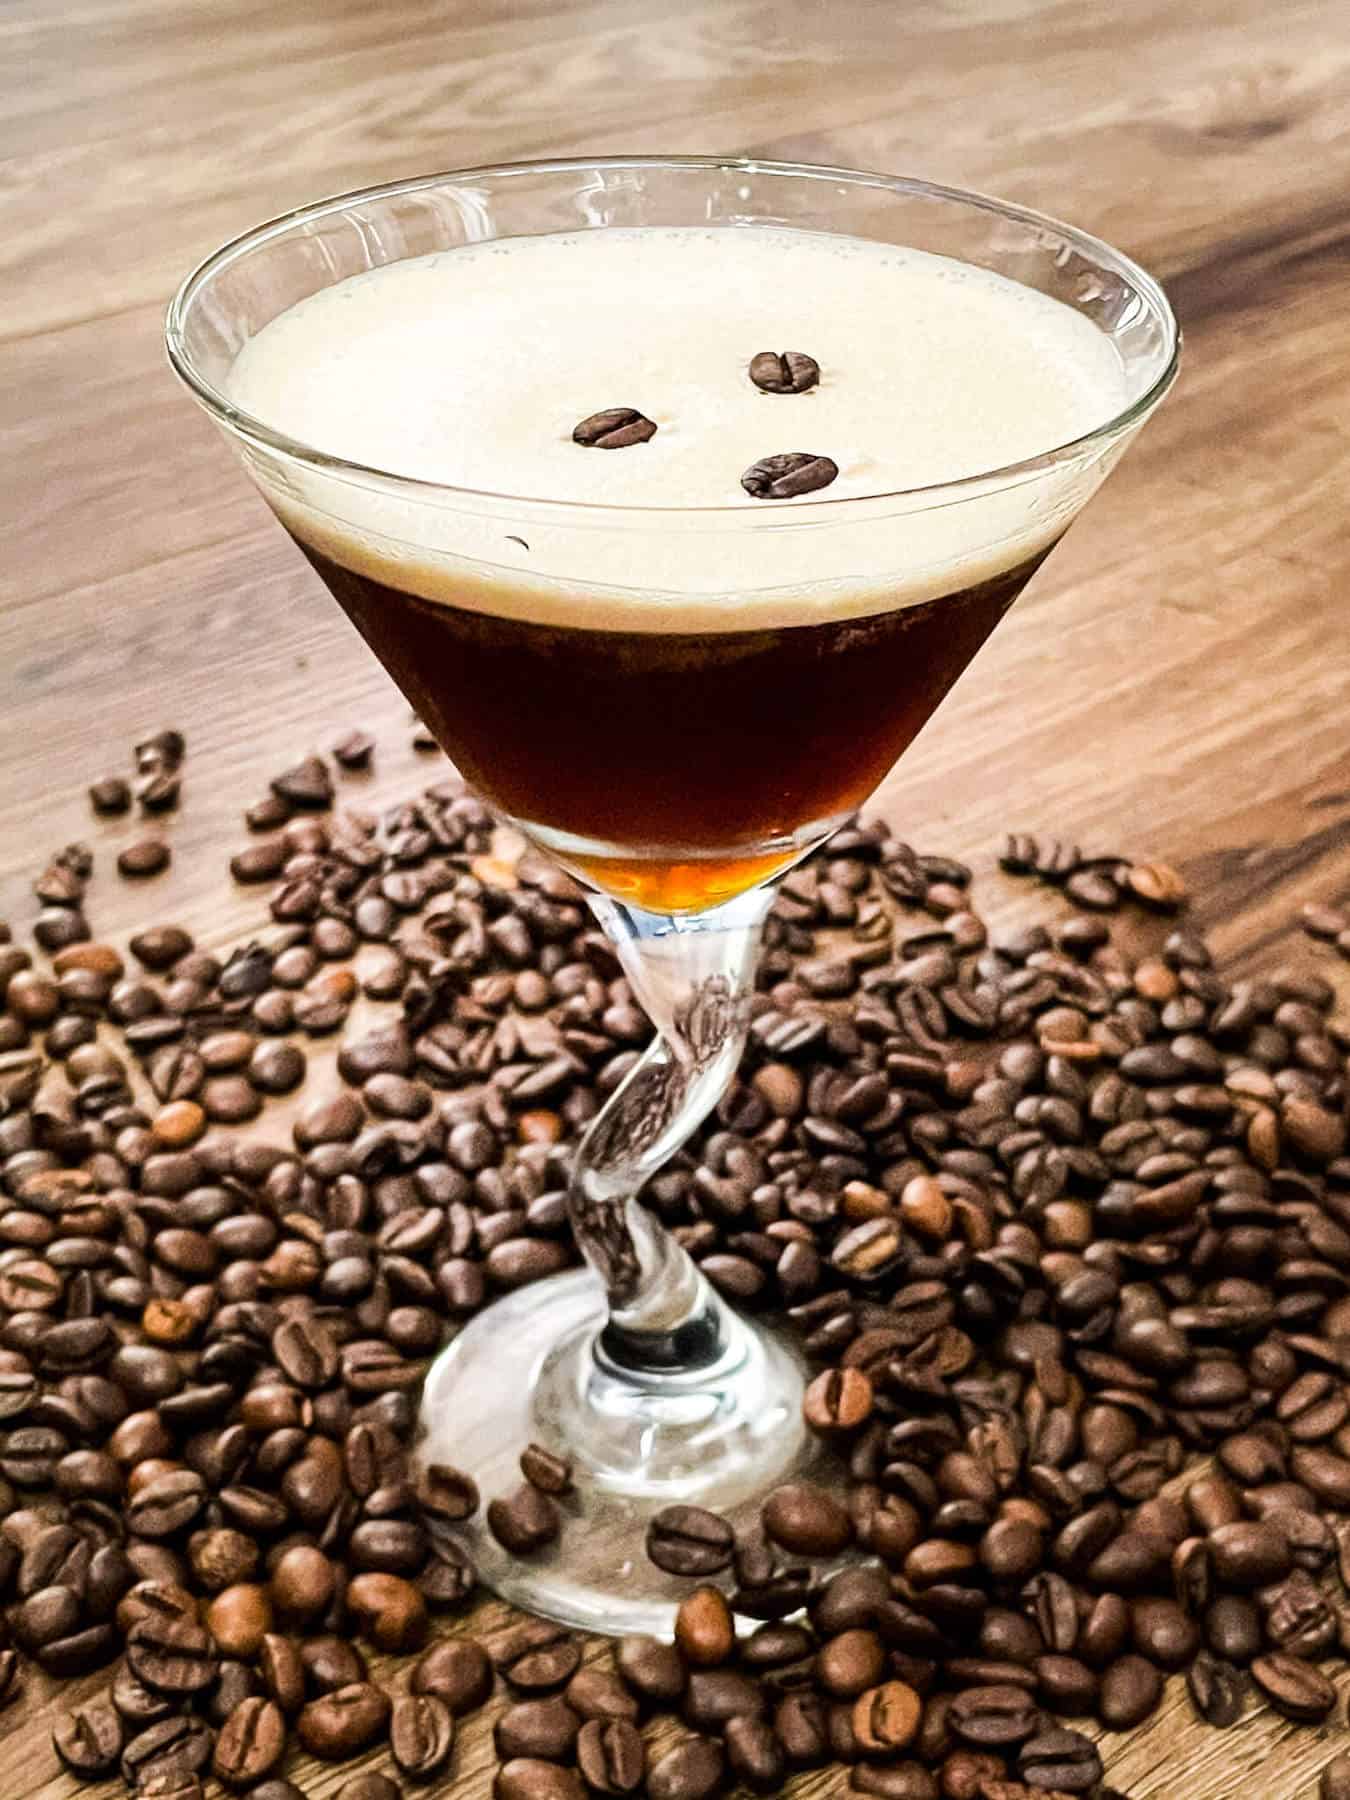 A glass full of the coffee cocktail with beans all around it